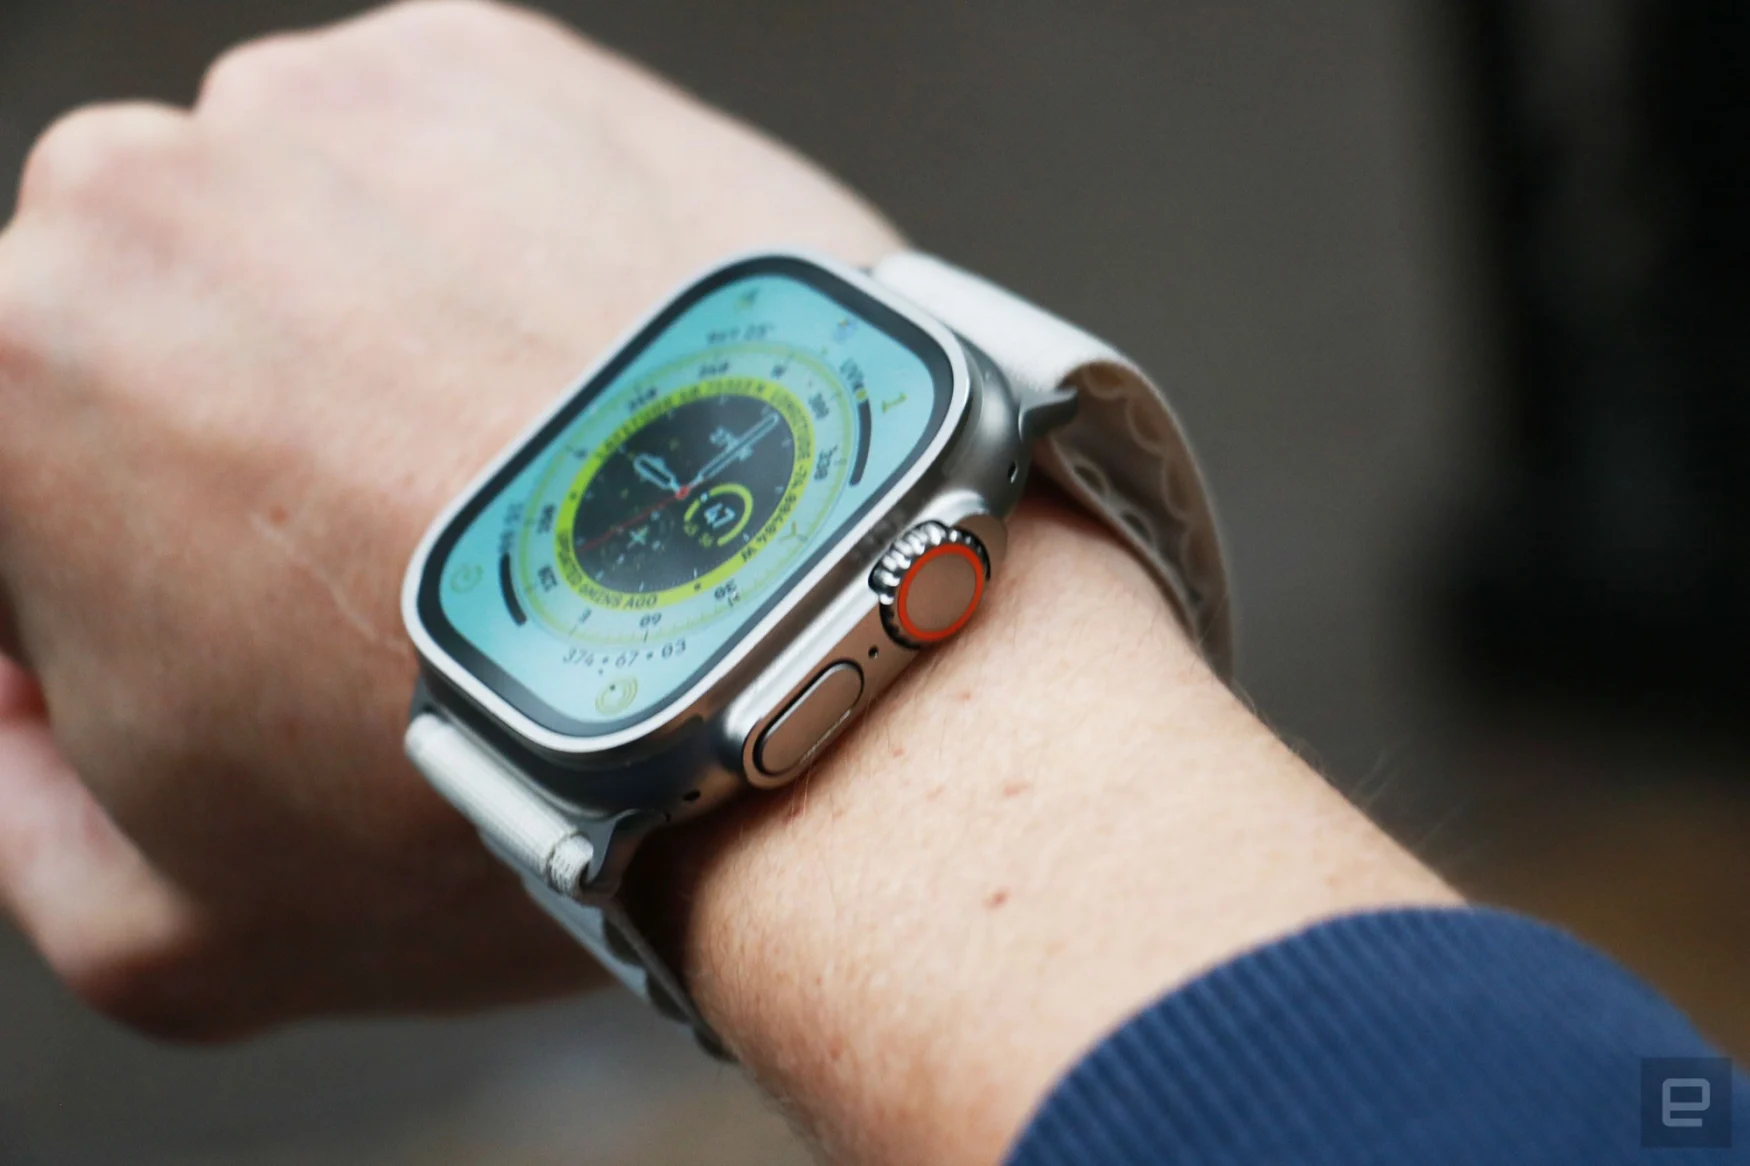 Apple Watch Ultra review: A big smartwatch with some little quirks